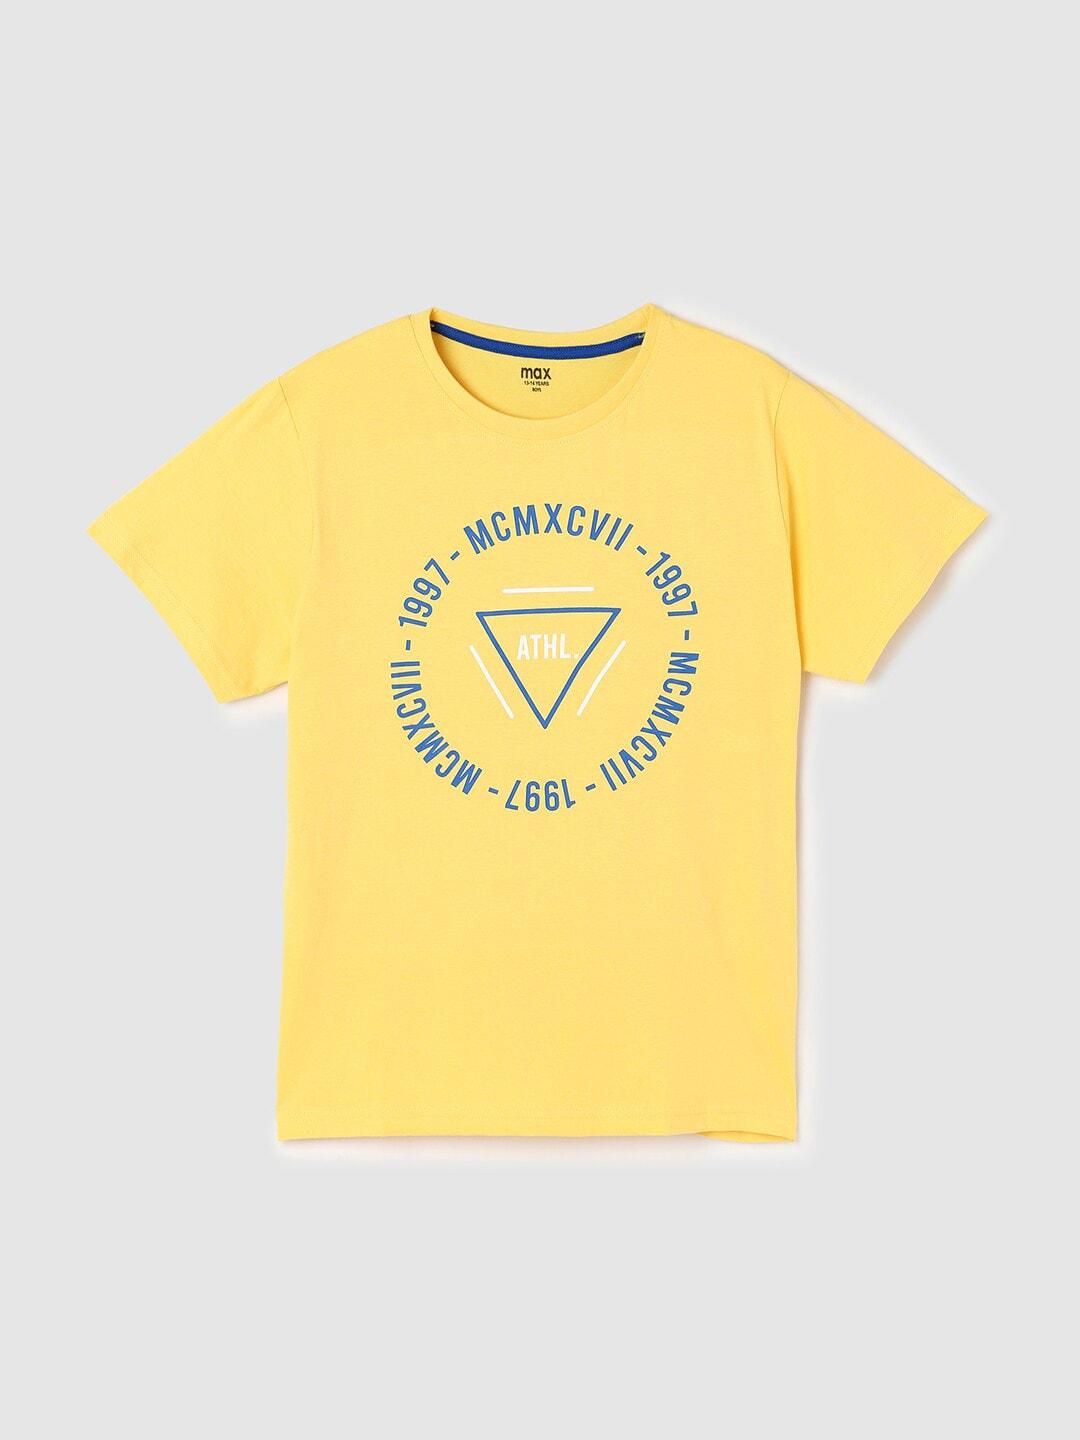 max Boys Yellow Typography Printed Pure Cotton T-shirt